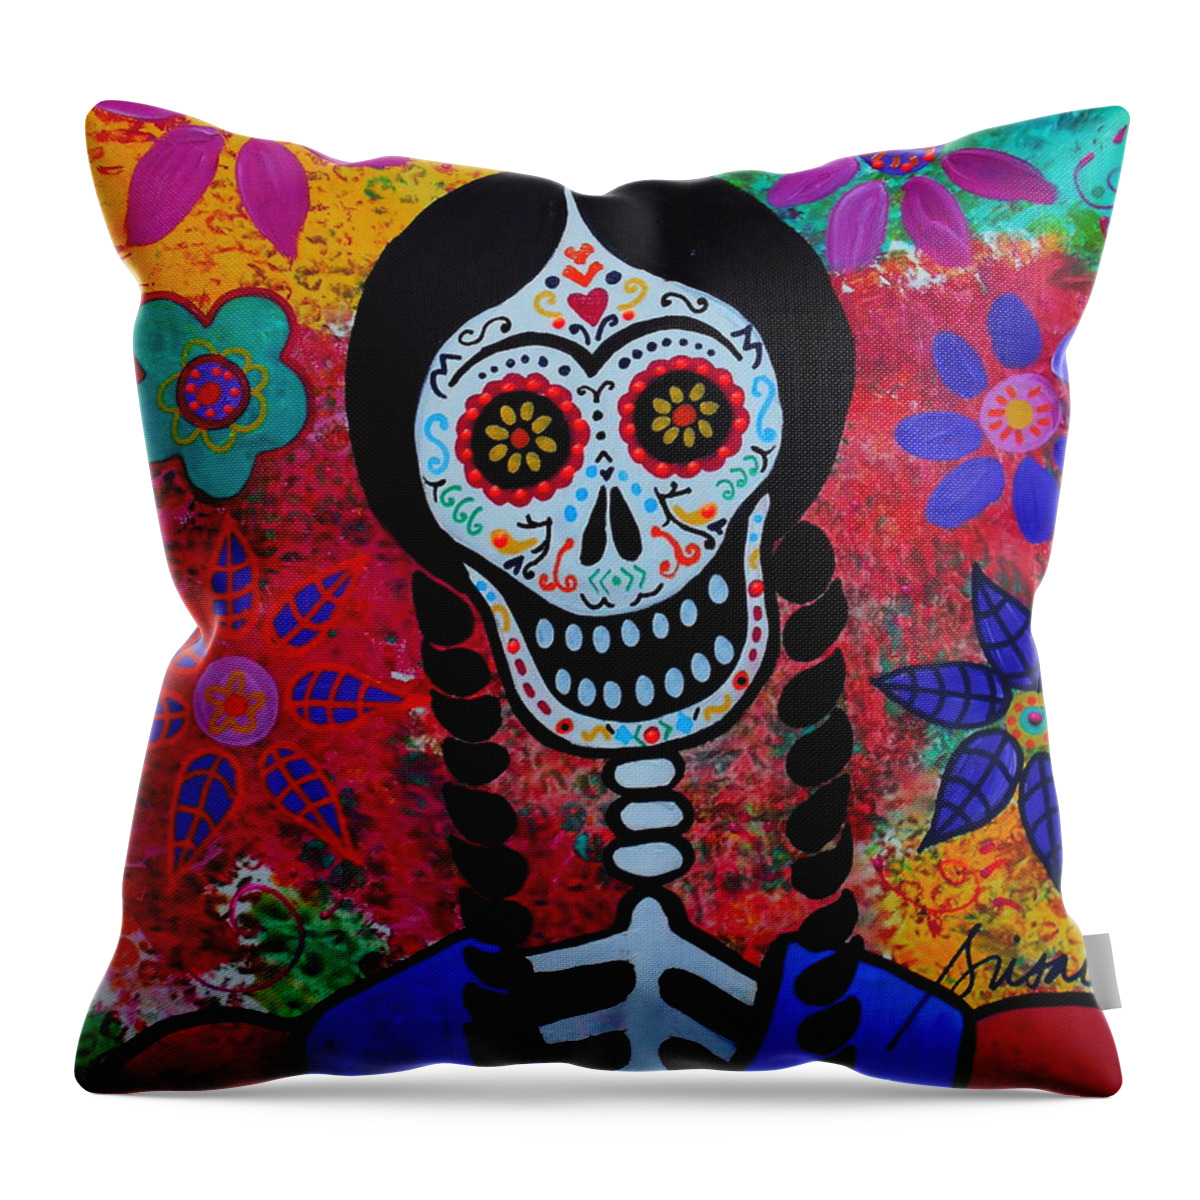 Young Frida Kahlo Throw Pillow featuring the painting Young Frida Kahlo 2 by Pristine Cartera Turkus